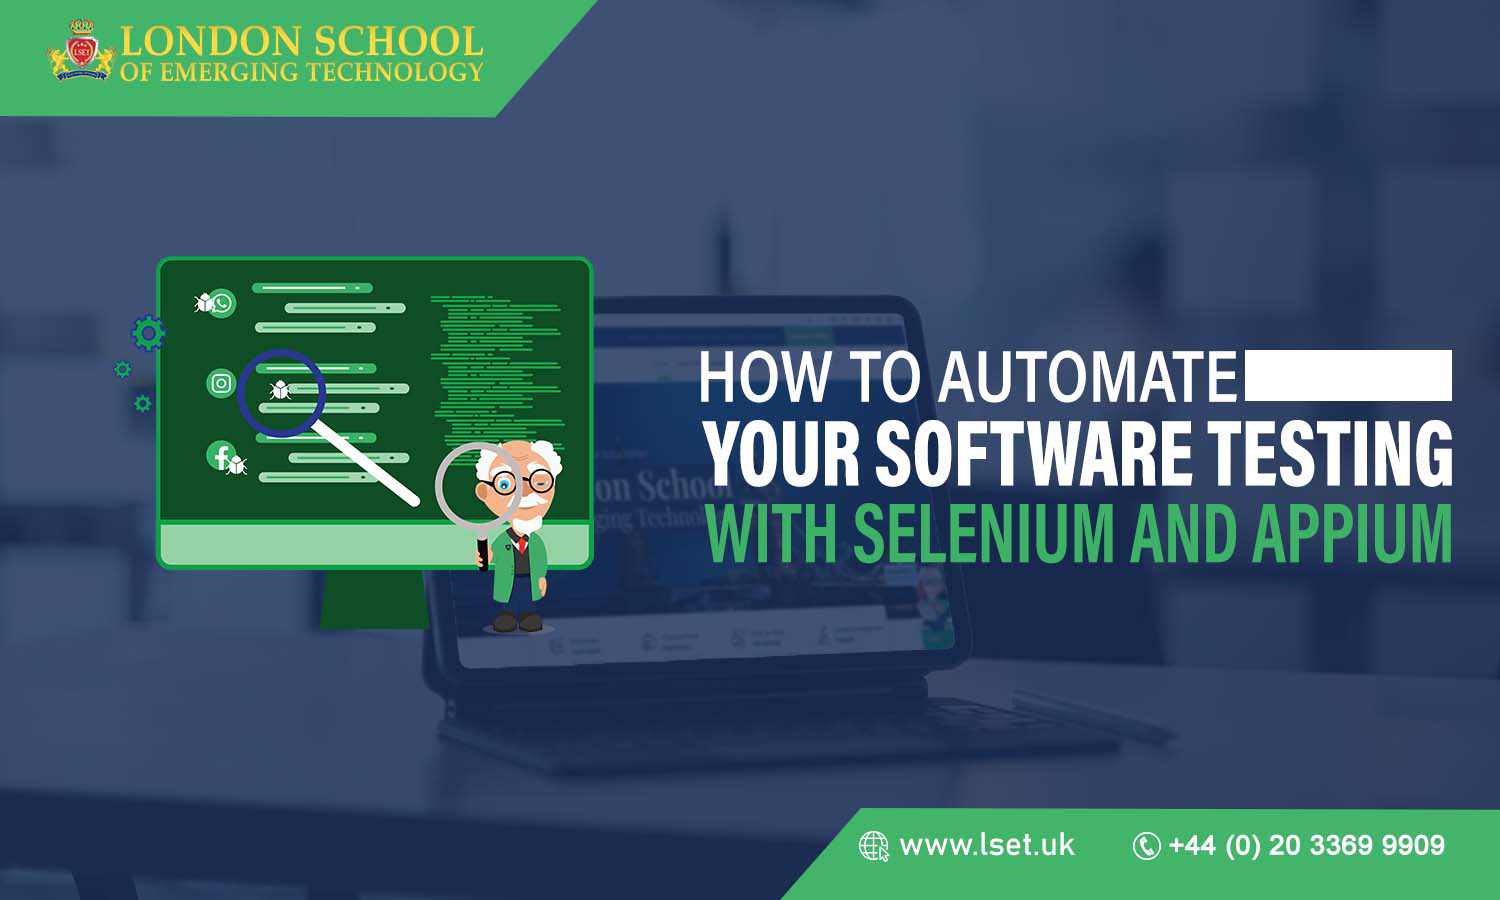 How to Automate Your Software Testing with Selenium and Appium